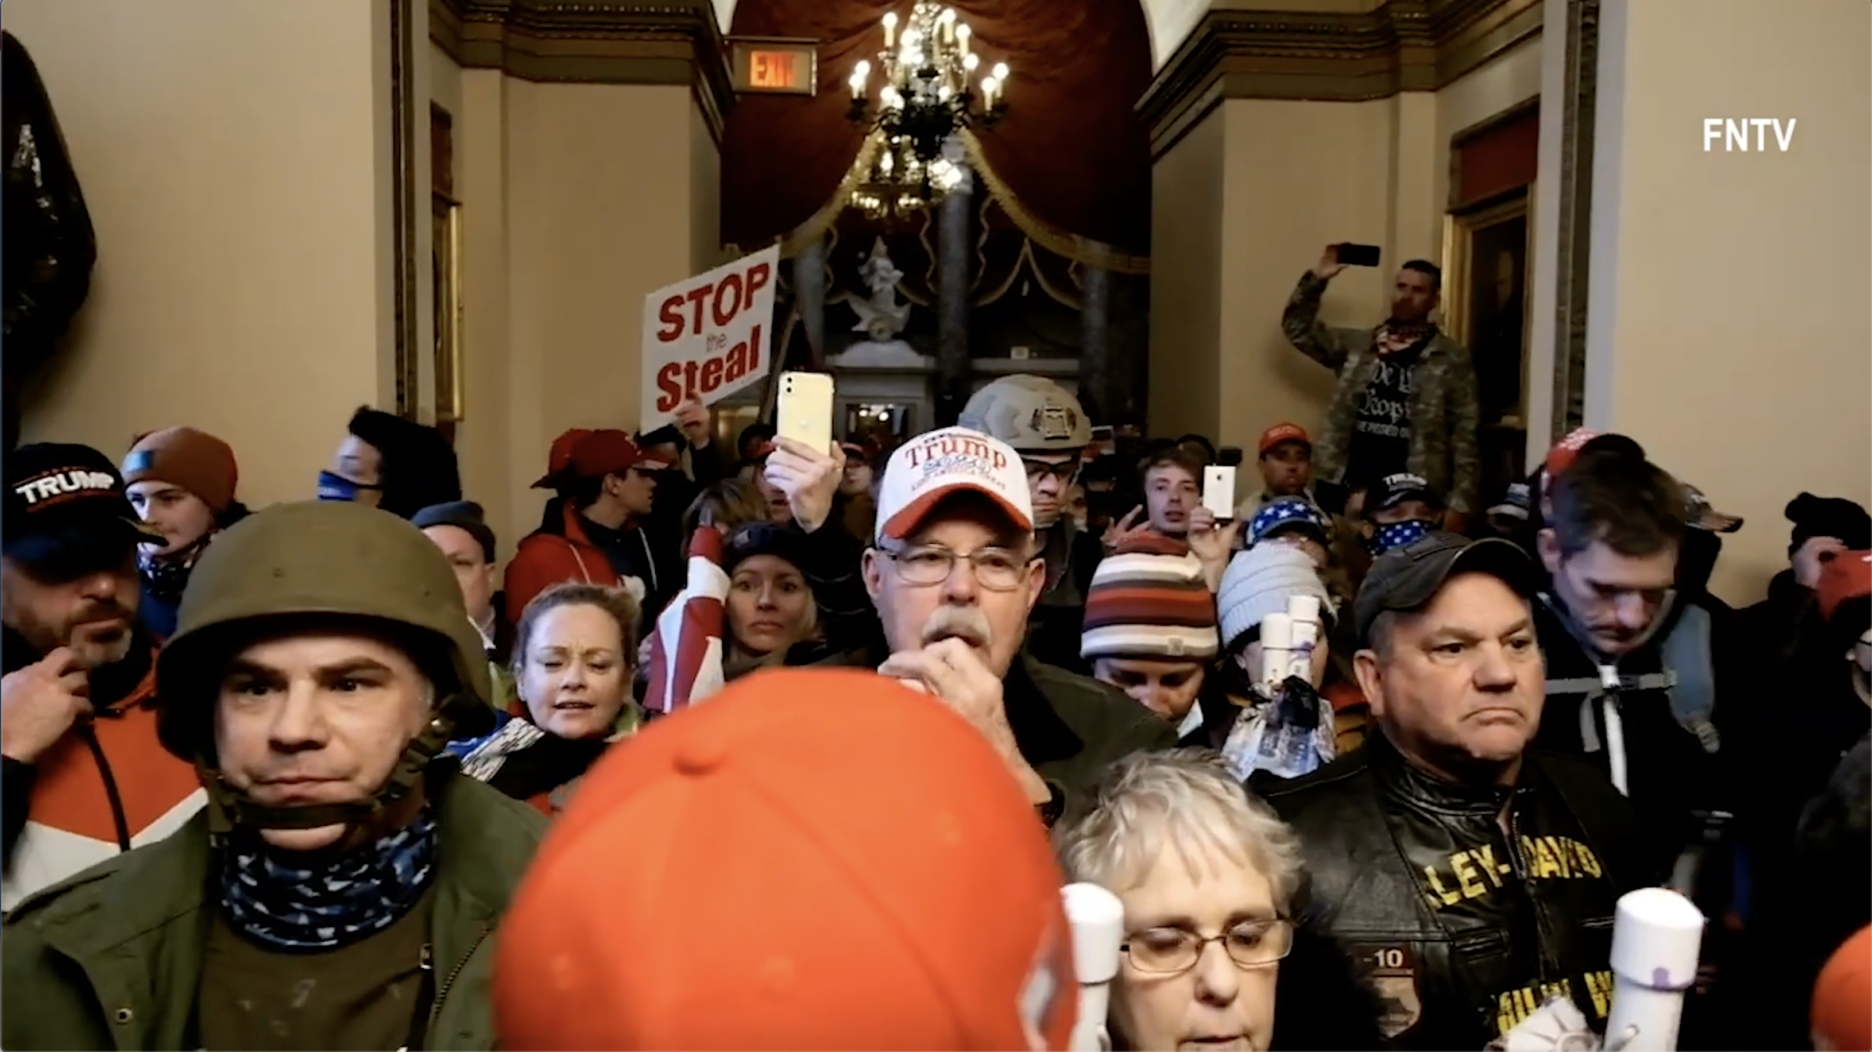 A still from INSURRECTION, a film by Andres Serrano. The still features Trump supporters gathering inside Capitol Hill.